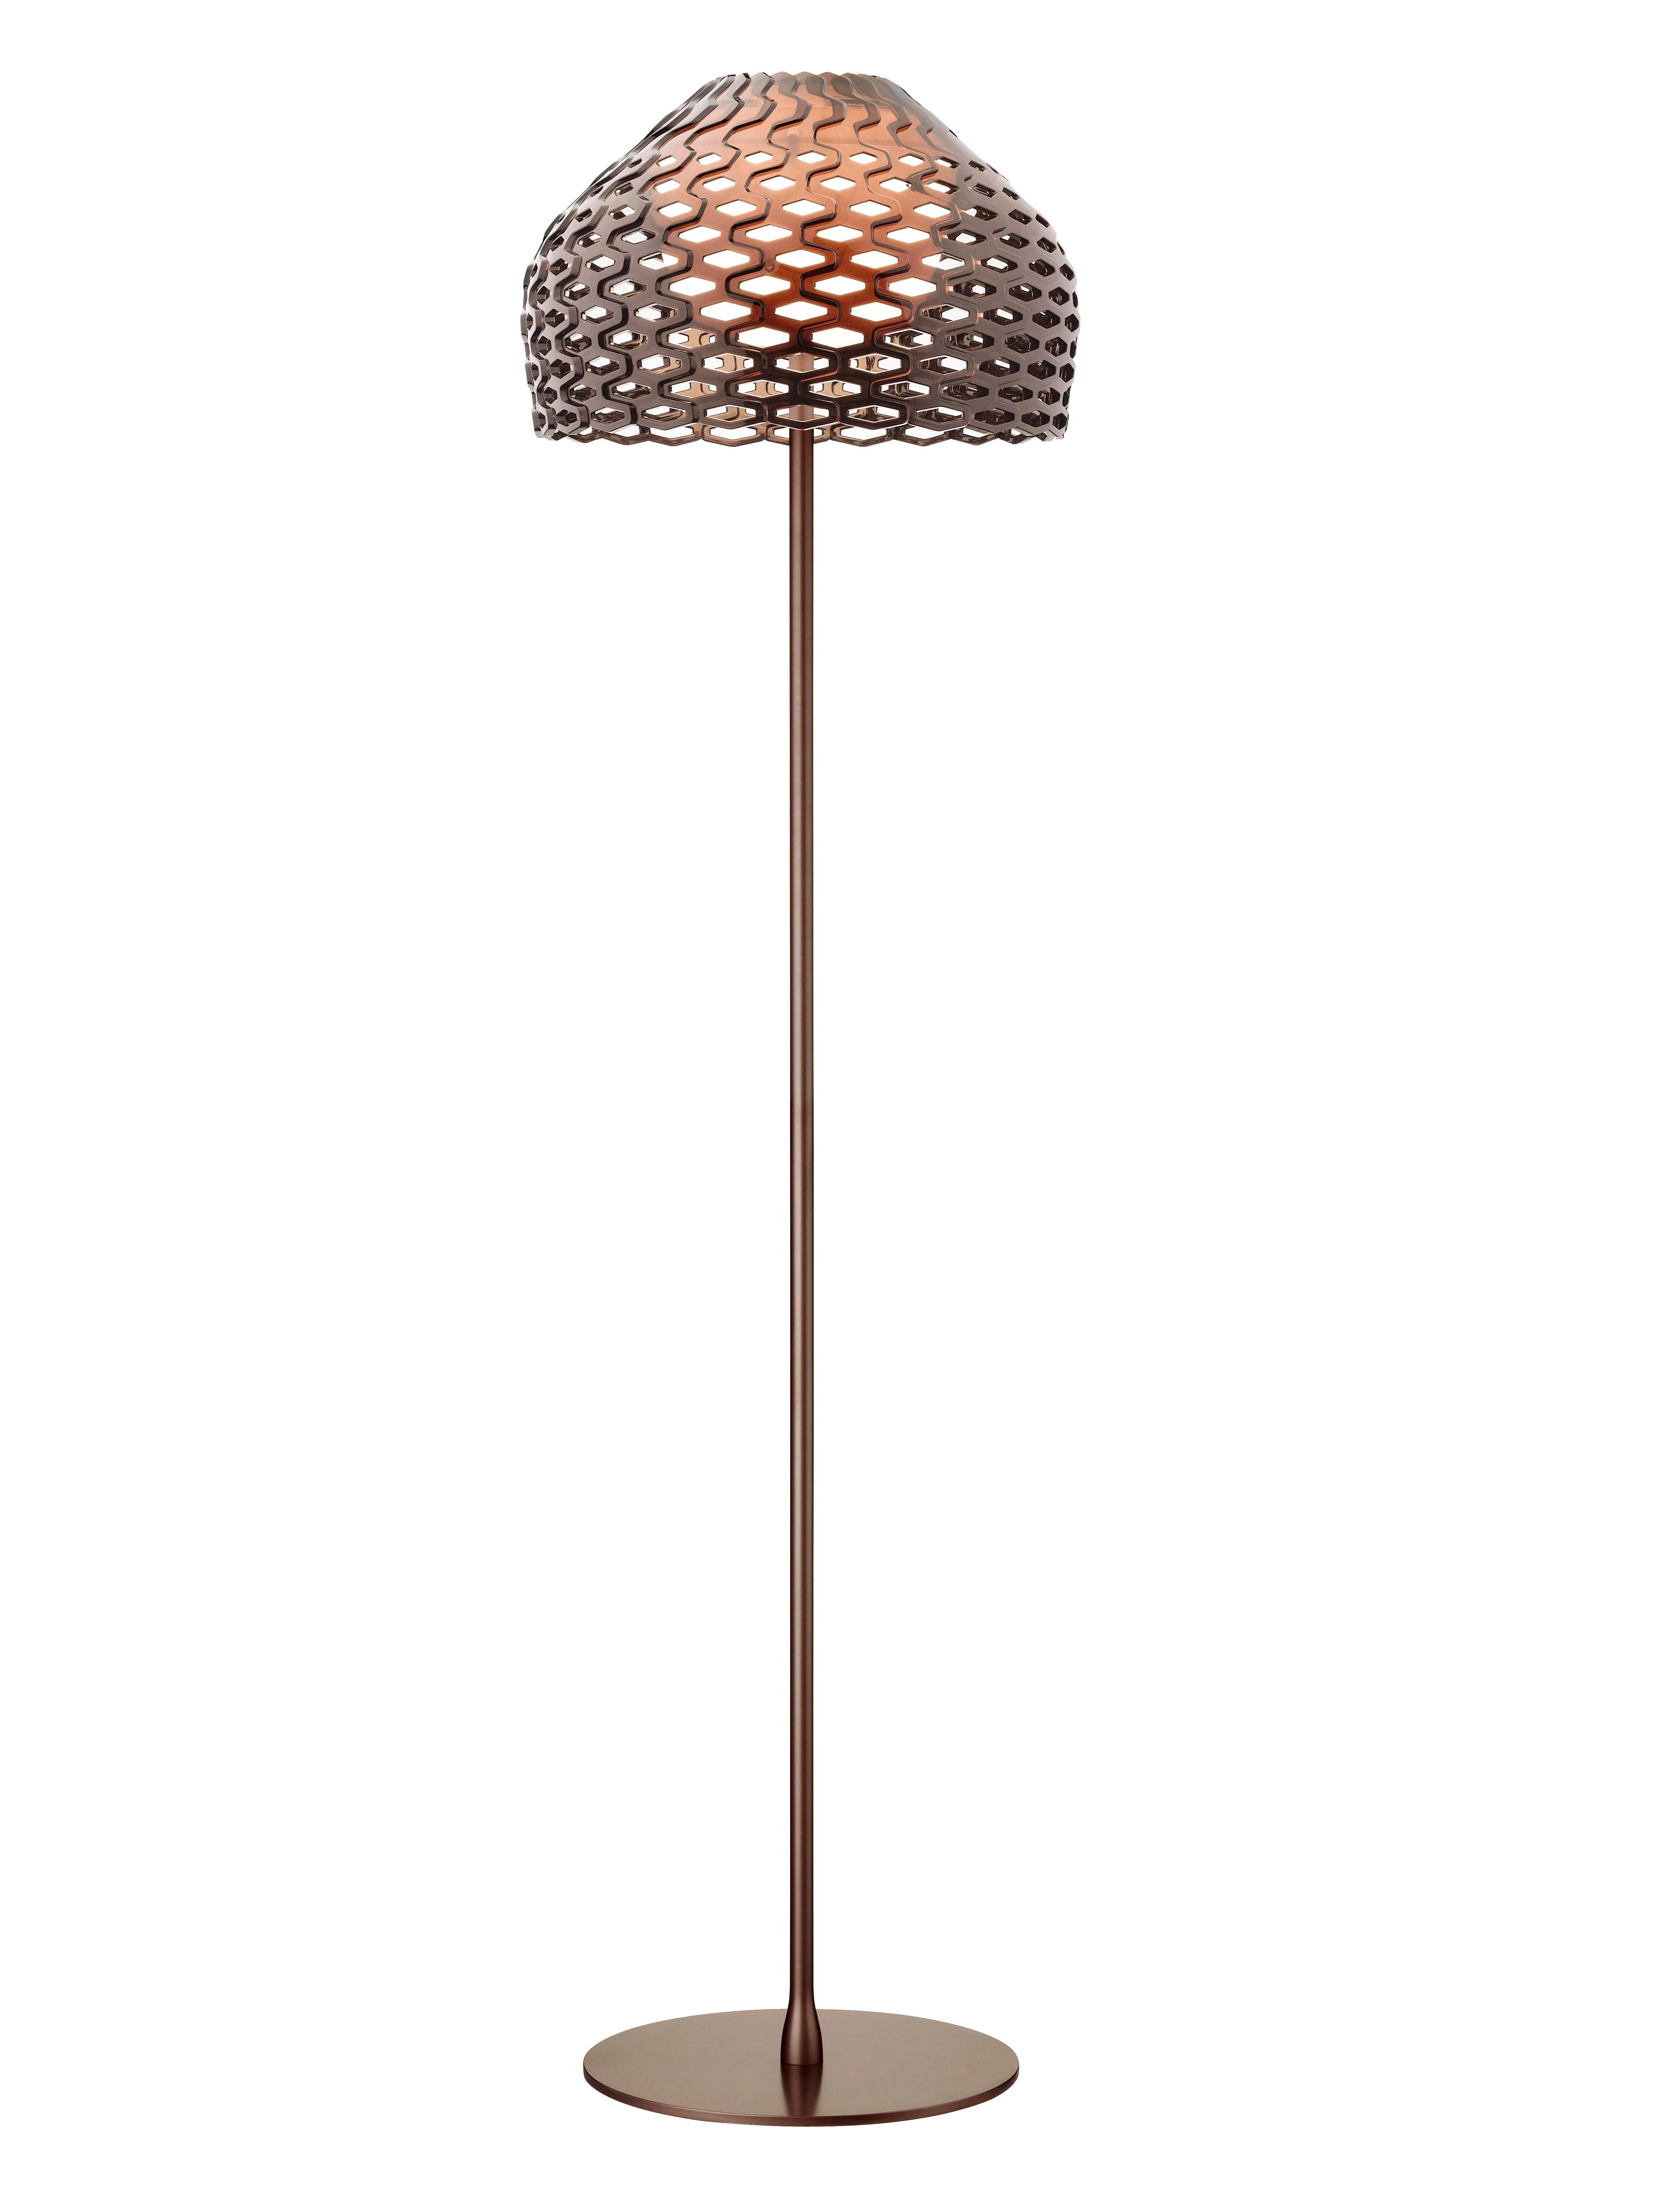 Its name is French for “armadillo,” the unassuming animal whose brilliant structure keeps it protected and makes it unique. Designer Patricia Urquiola conceptualized this floor lamp to play on the filtration of light, with remarkable results.

The